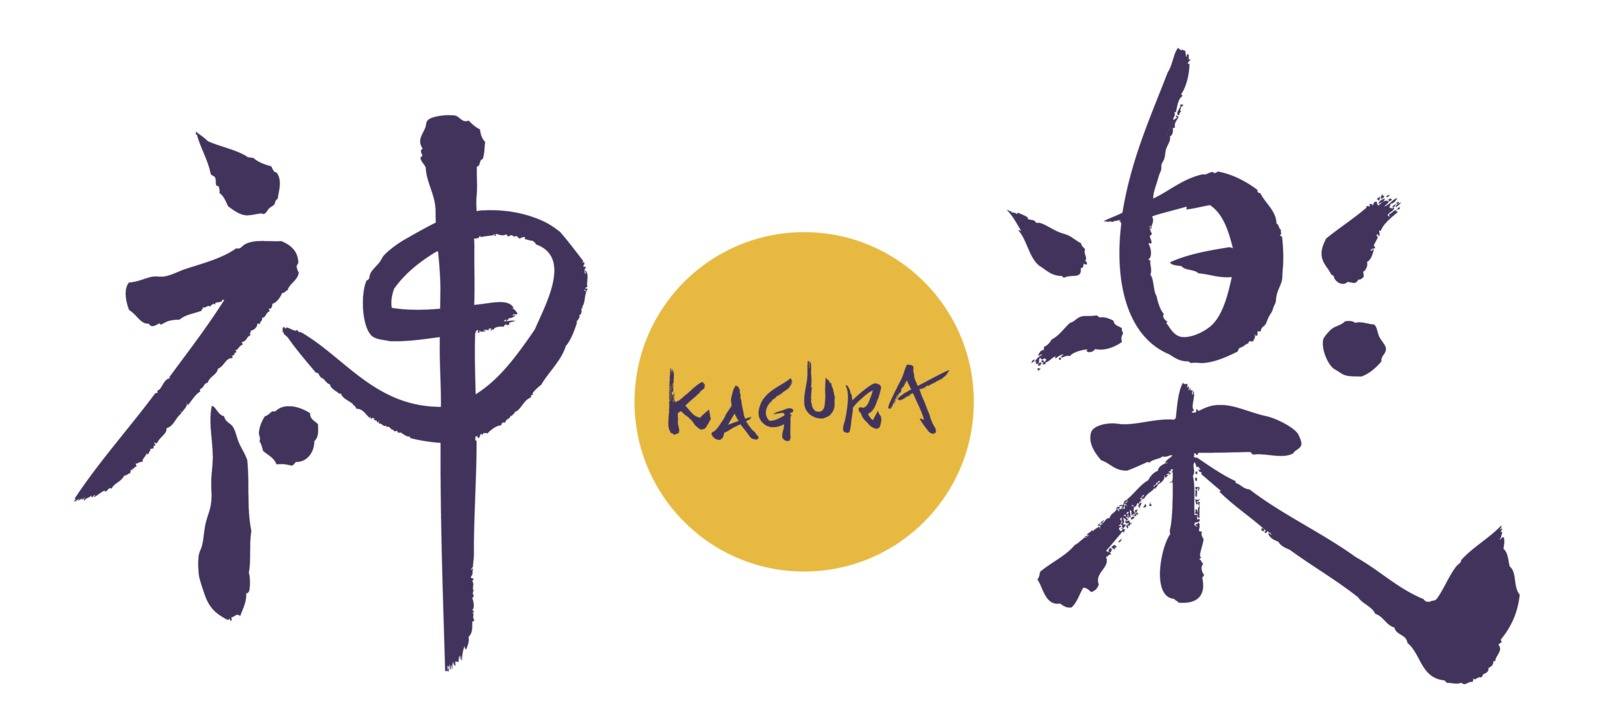 The character Kagura and moon with white background.The Japanese character written on the picture means kagura. Kagura is japanese traditional Dance for God.